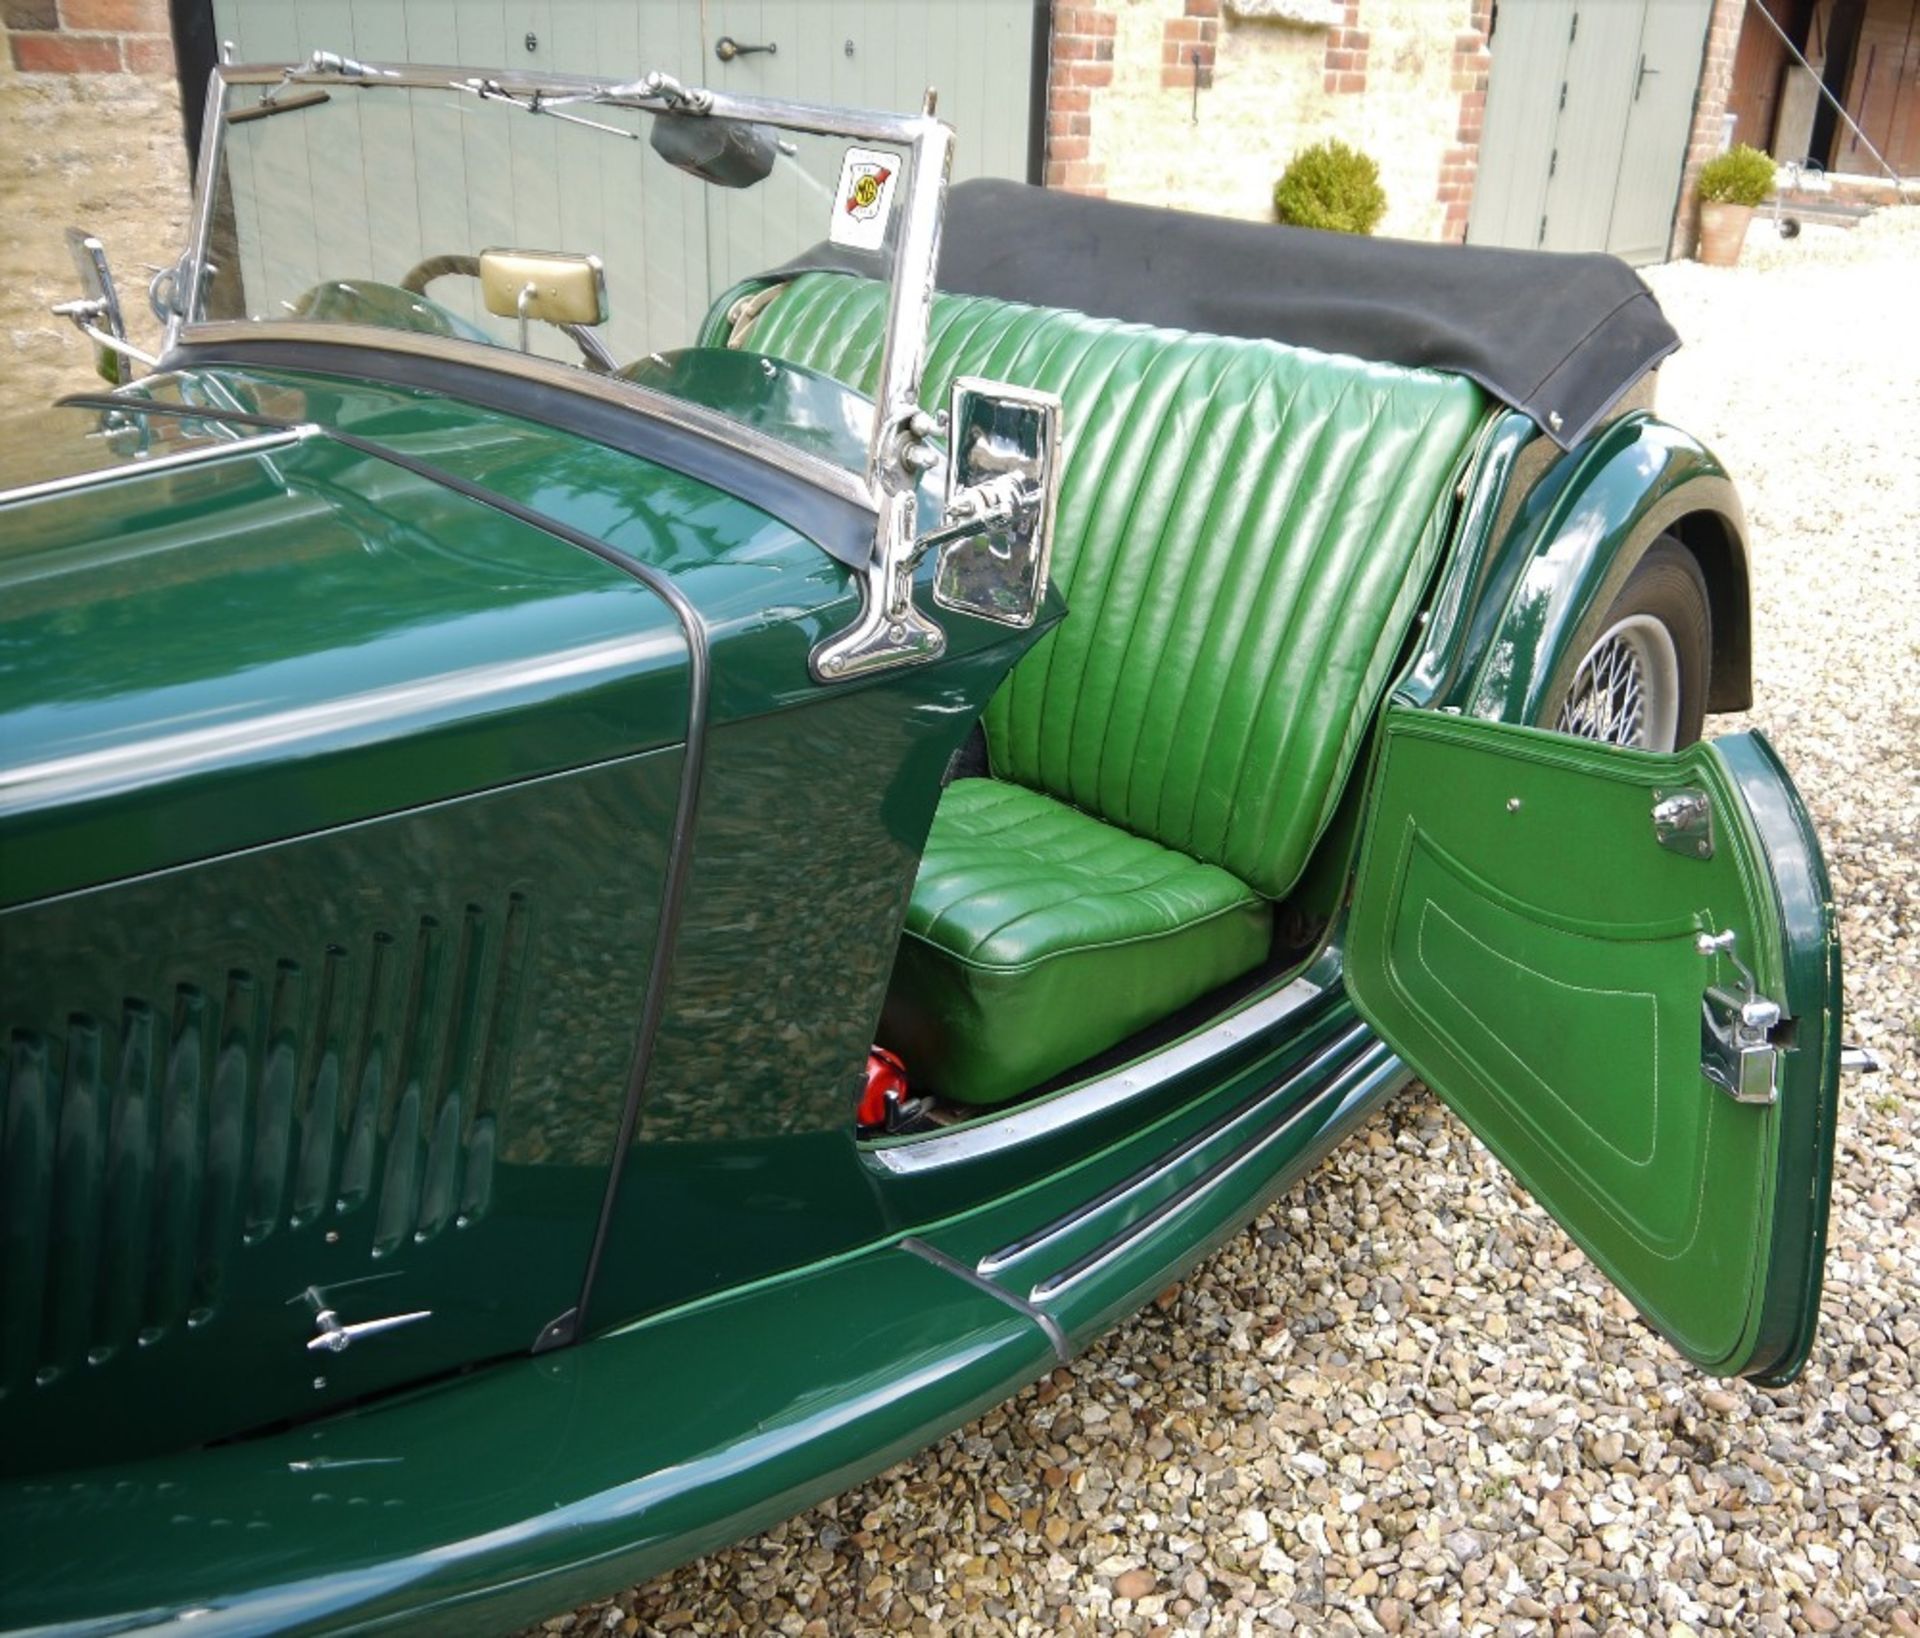 1949 MG TC 'MIDGET' Registration Number: XVV 276 Chassis number: TC 7712 Recorded Mileage: 40,700 - Image 11 of 21